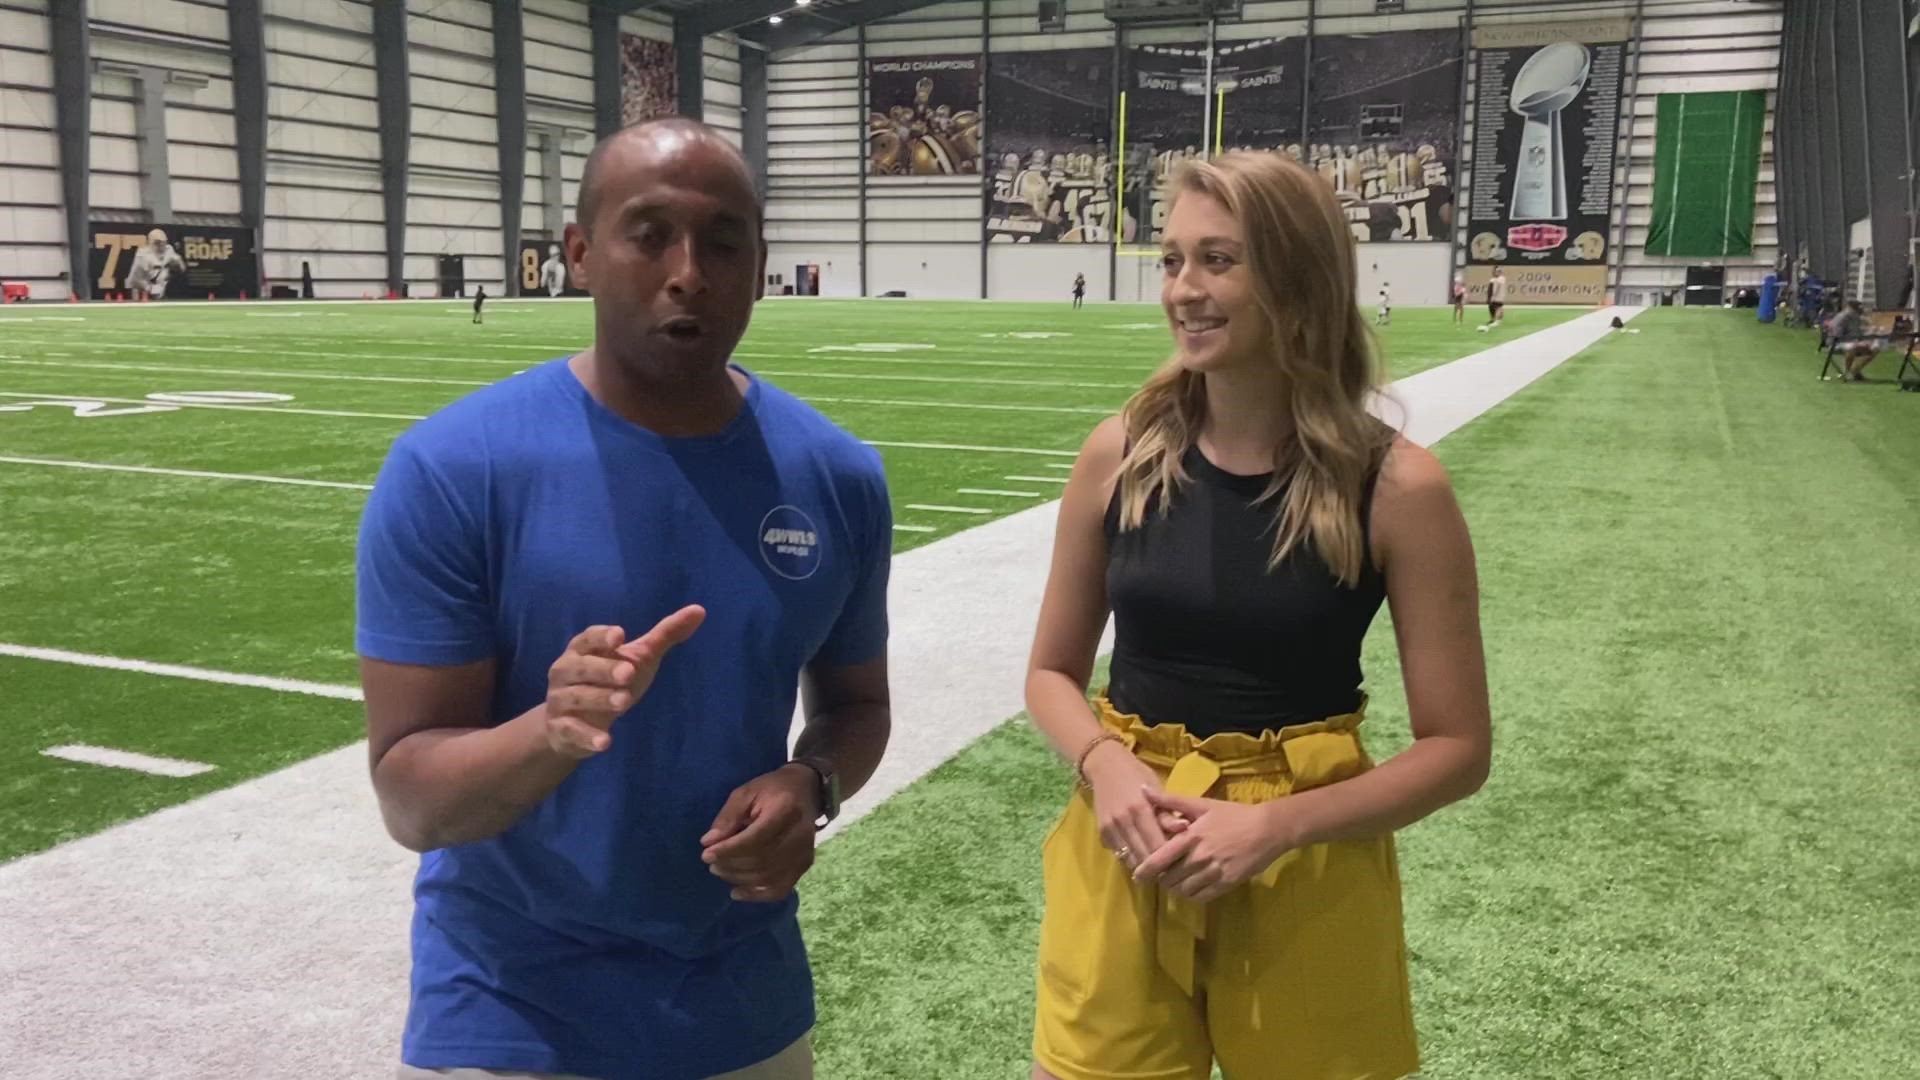 WWL-TV's Ricardo LeCompte and Brooke Kirchhofer break down day 4 of New Orleans Saints training camp